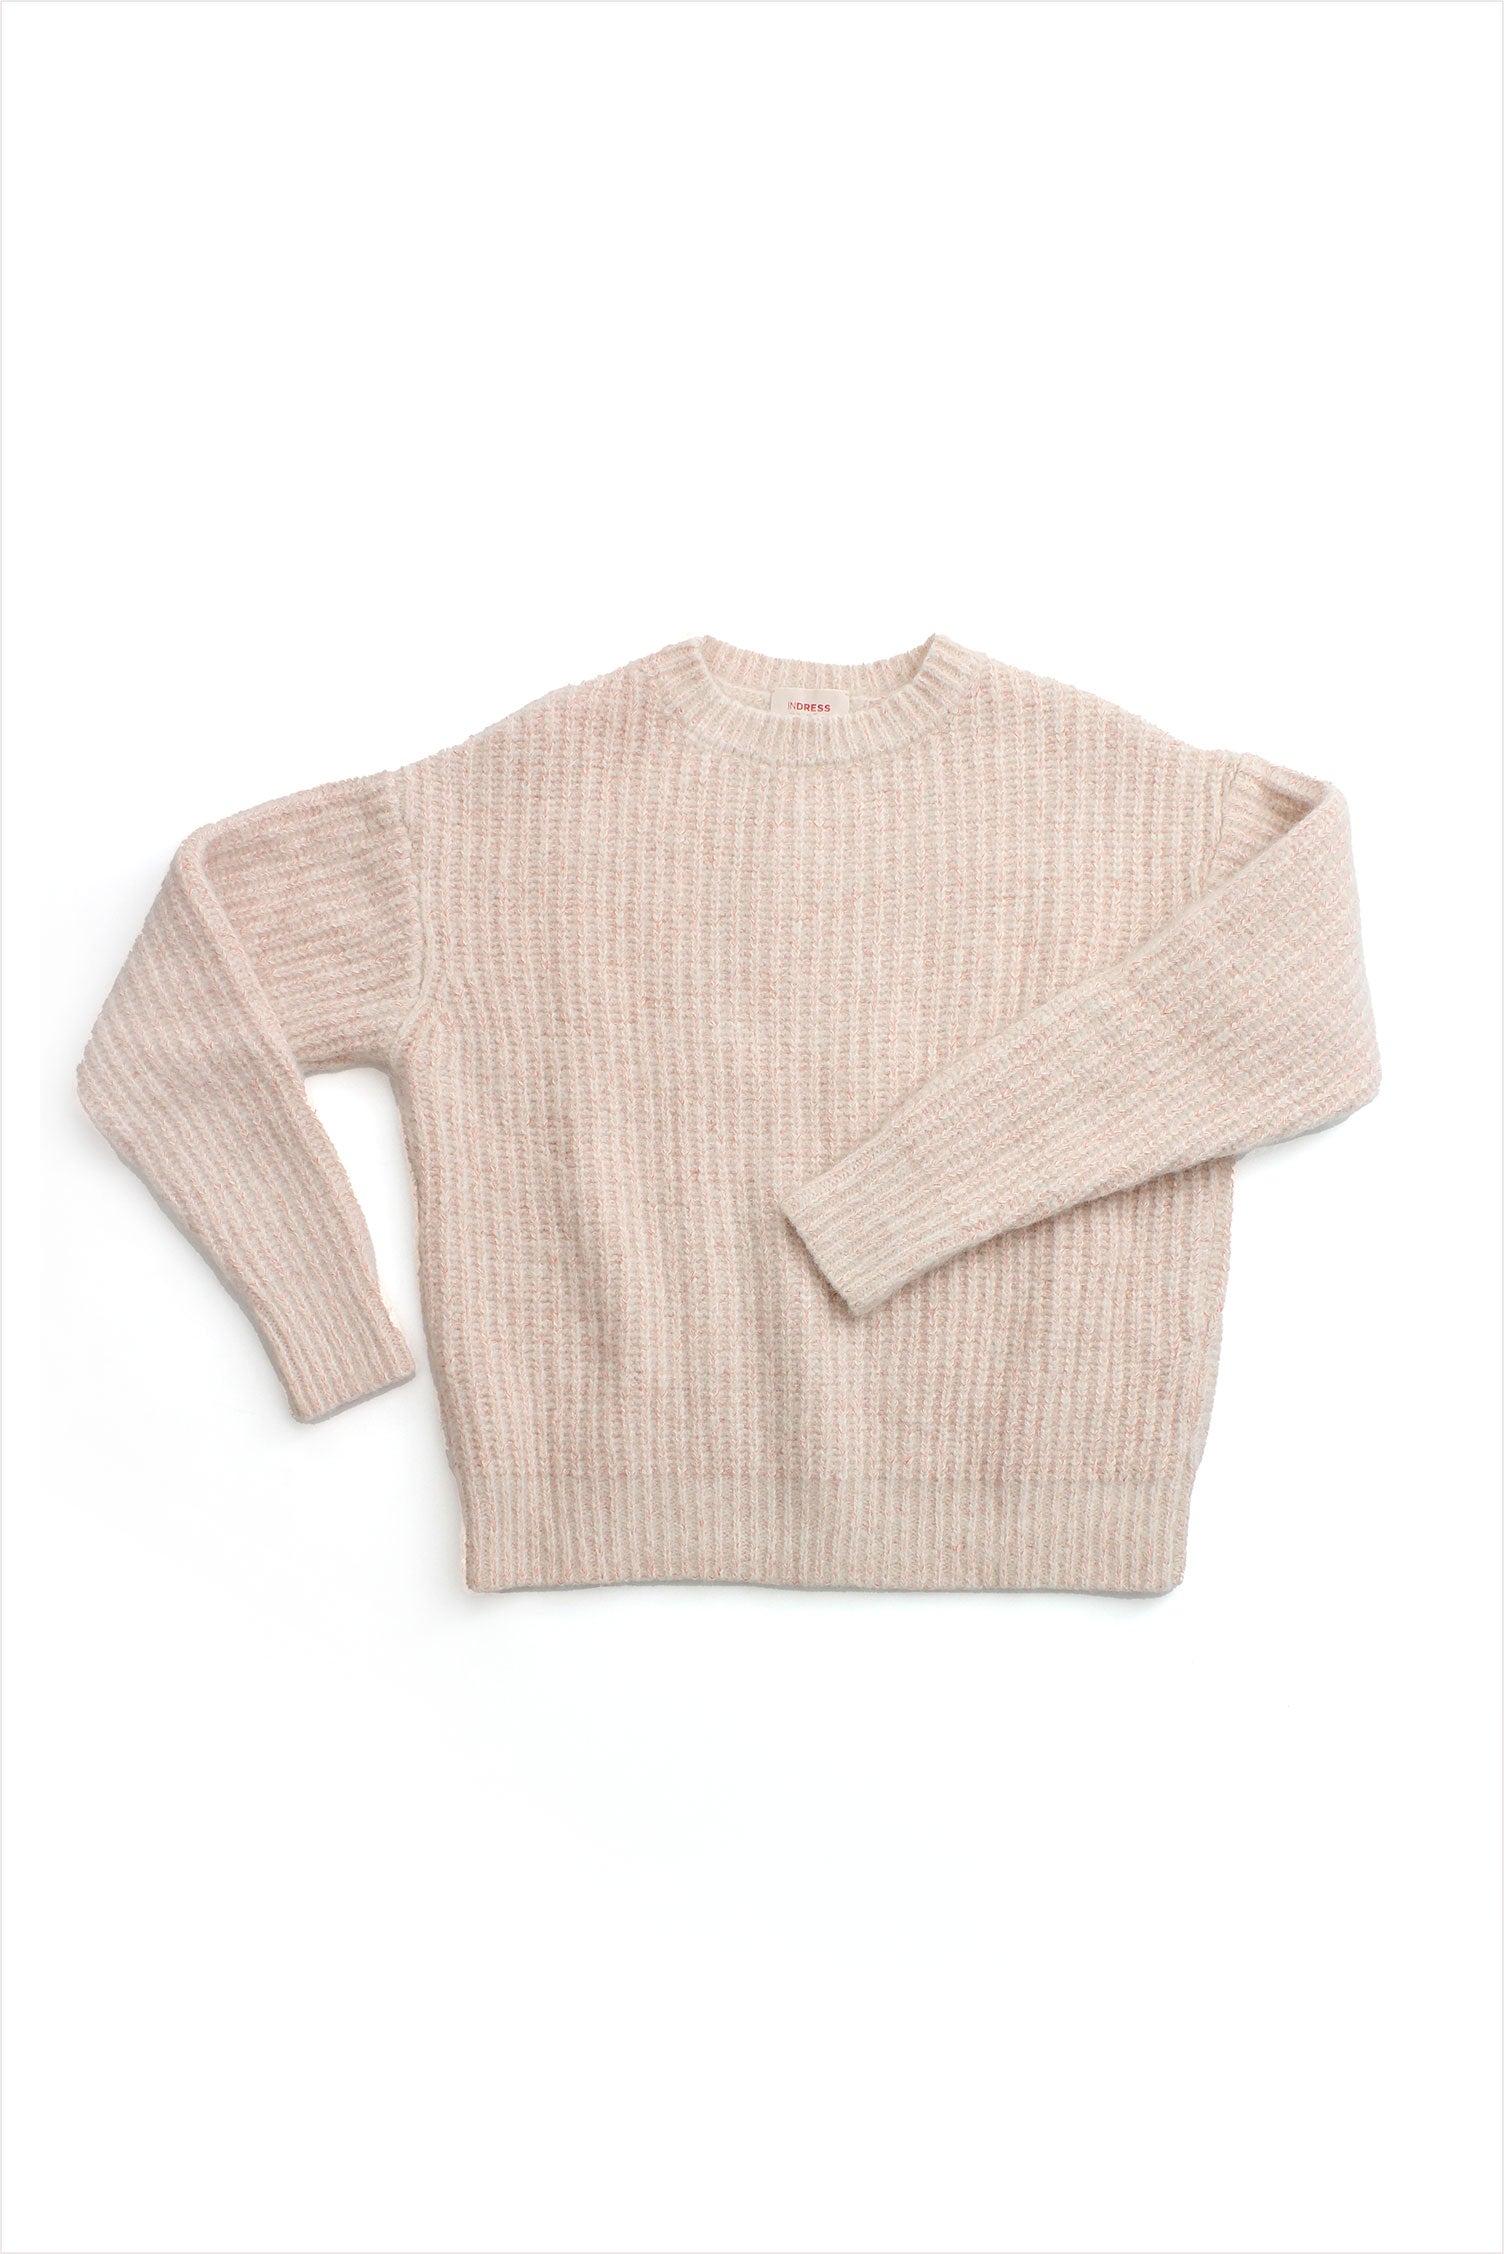 Indress Baby Grace Sweater Blush